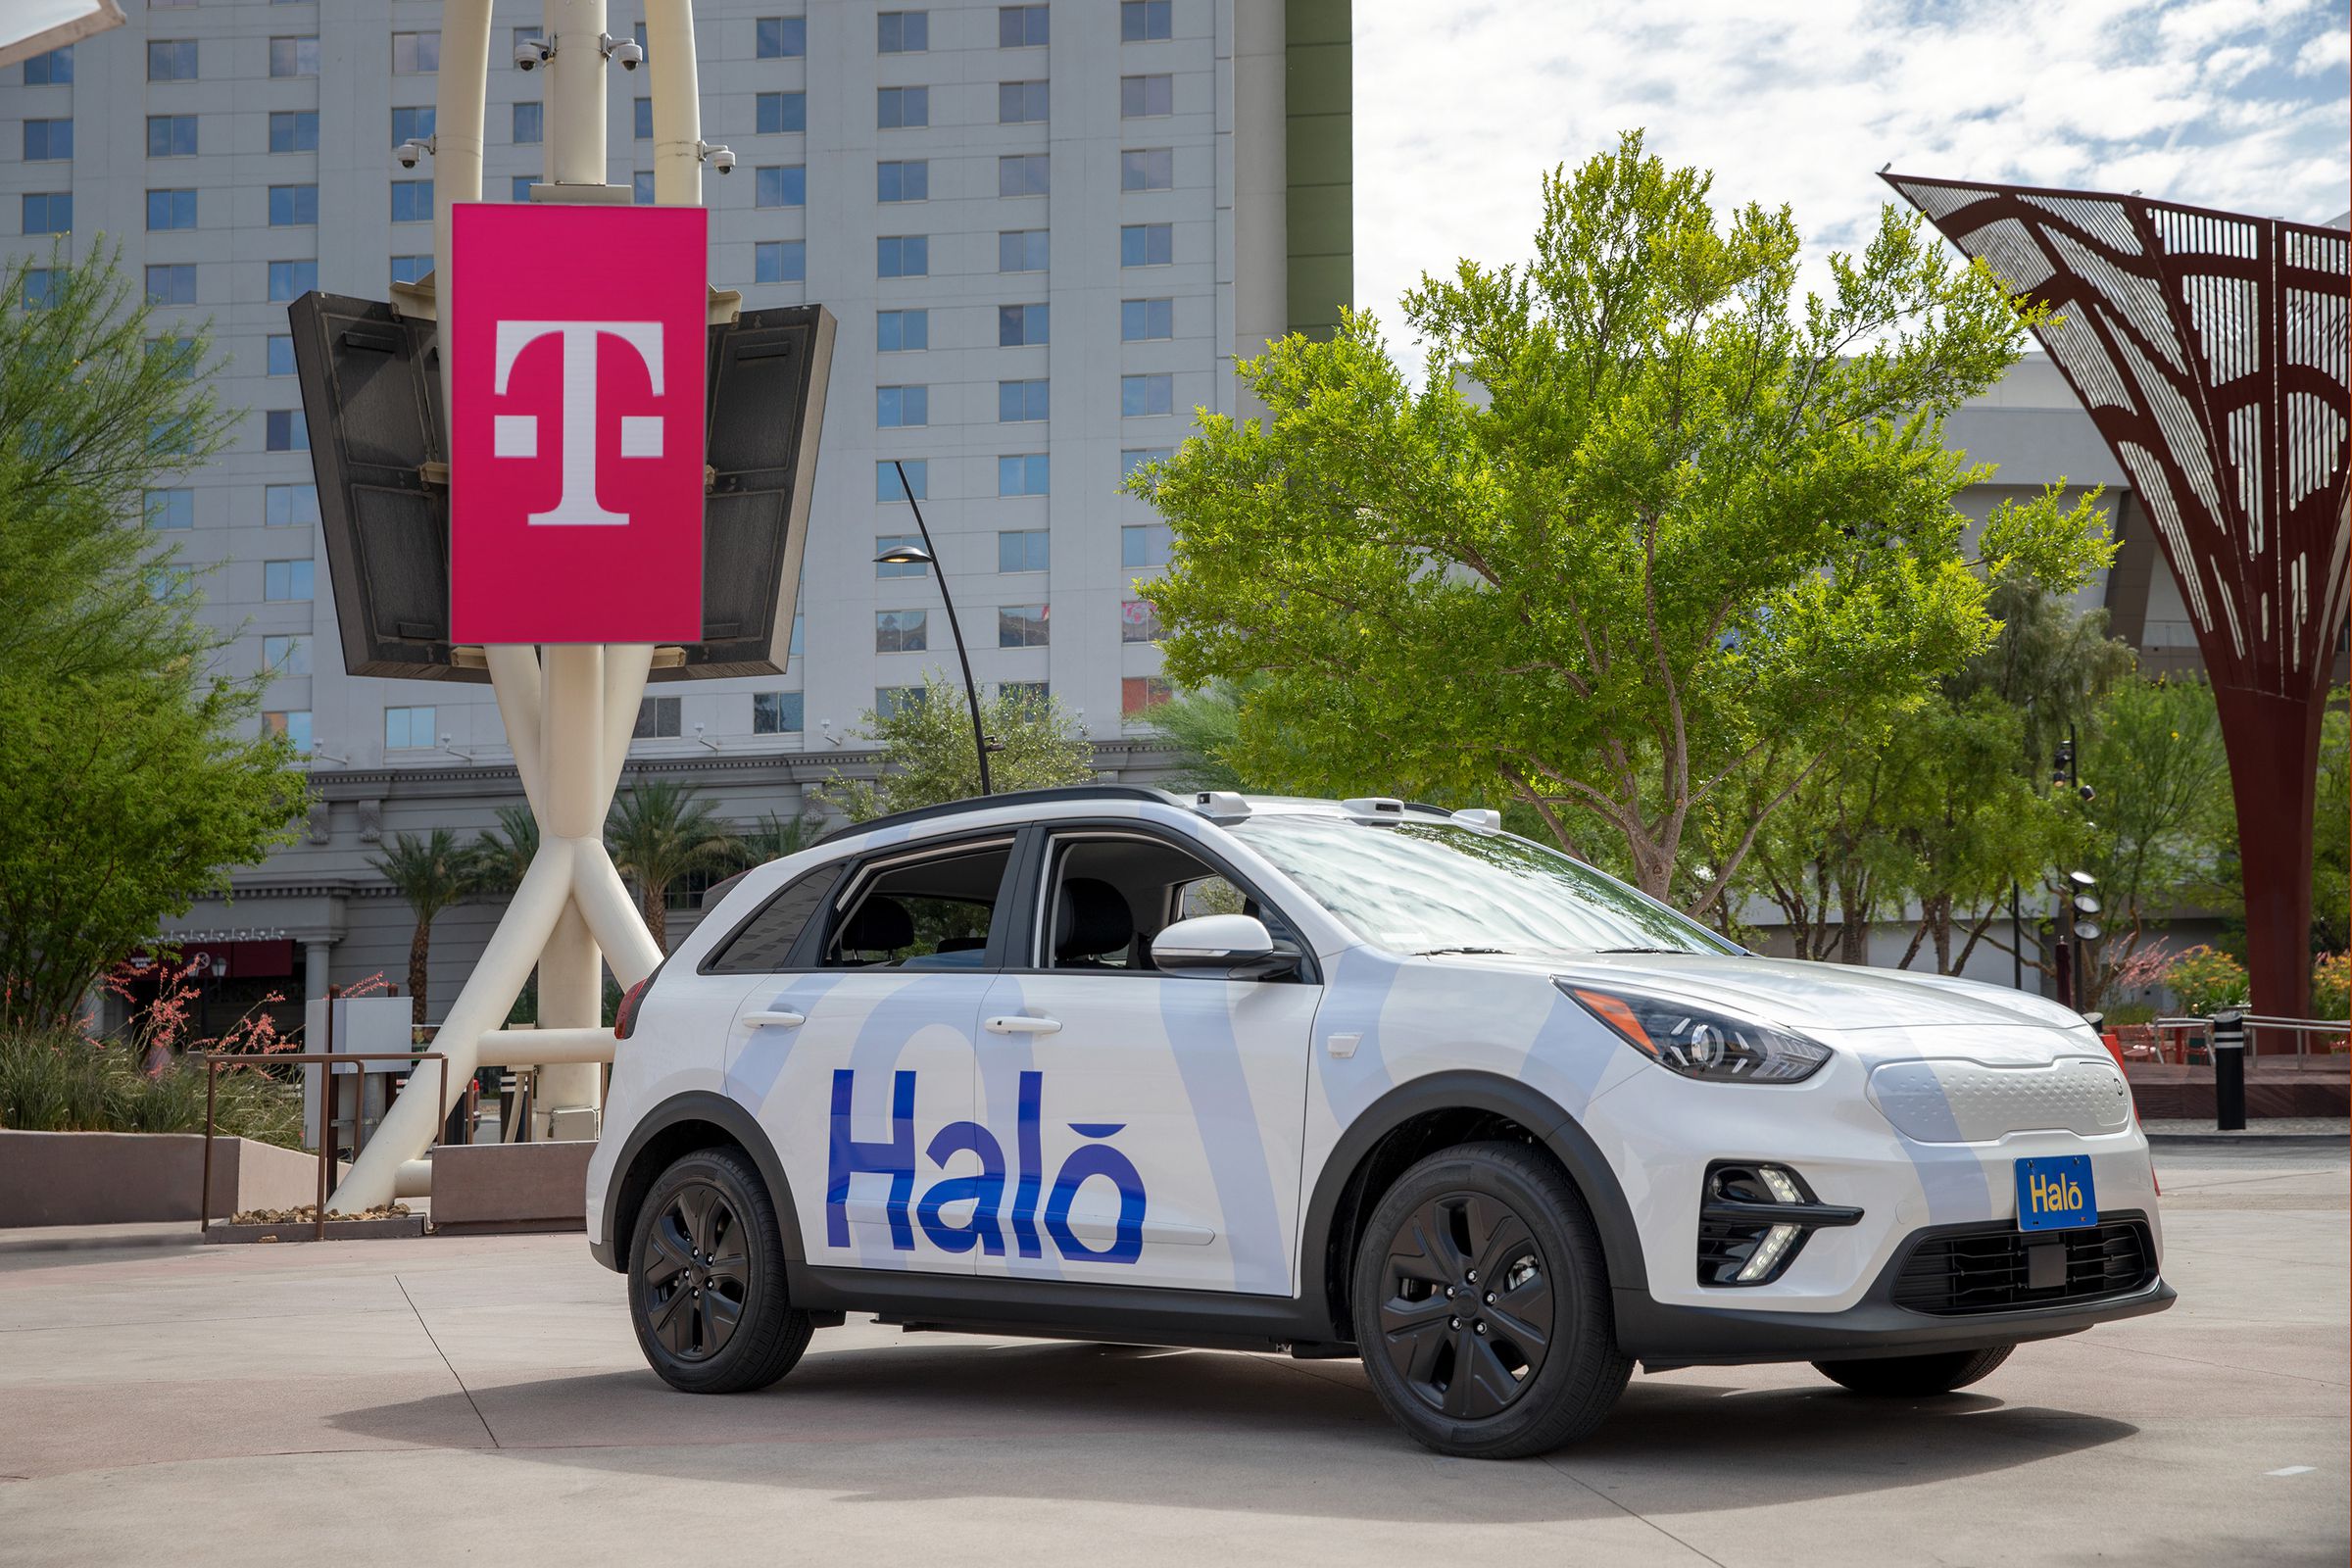 Halo says it will use remote drivers to operate its vehicles over T-Mobile 5G.